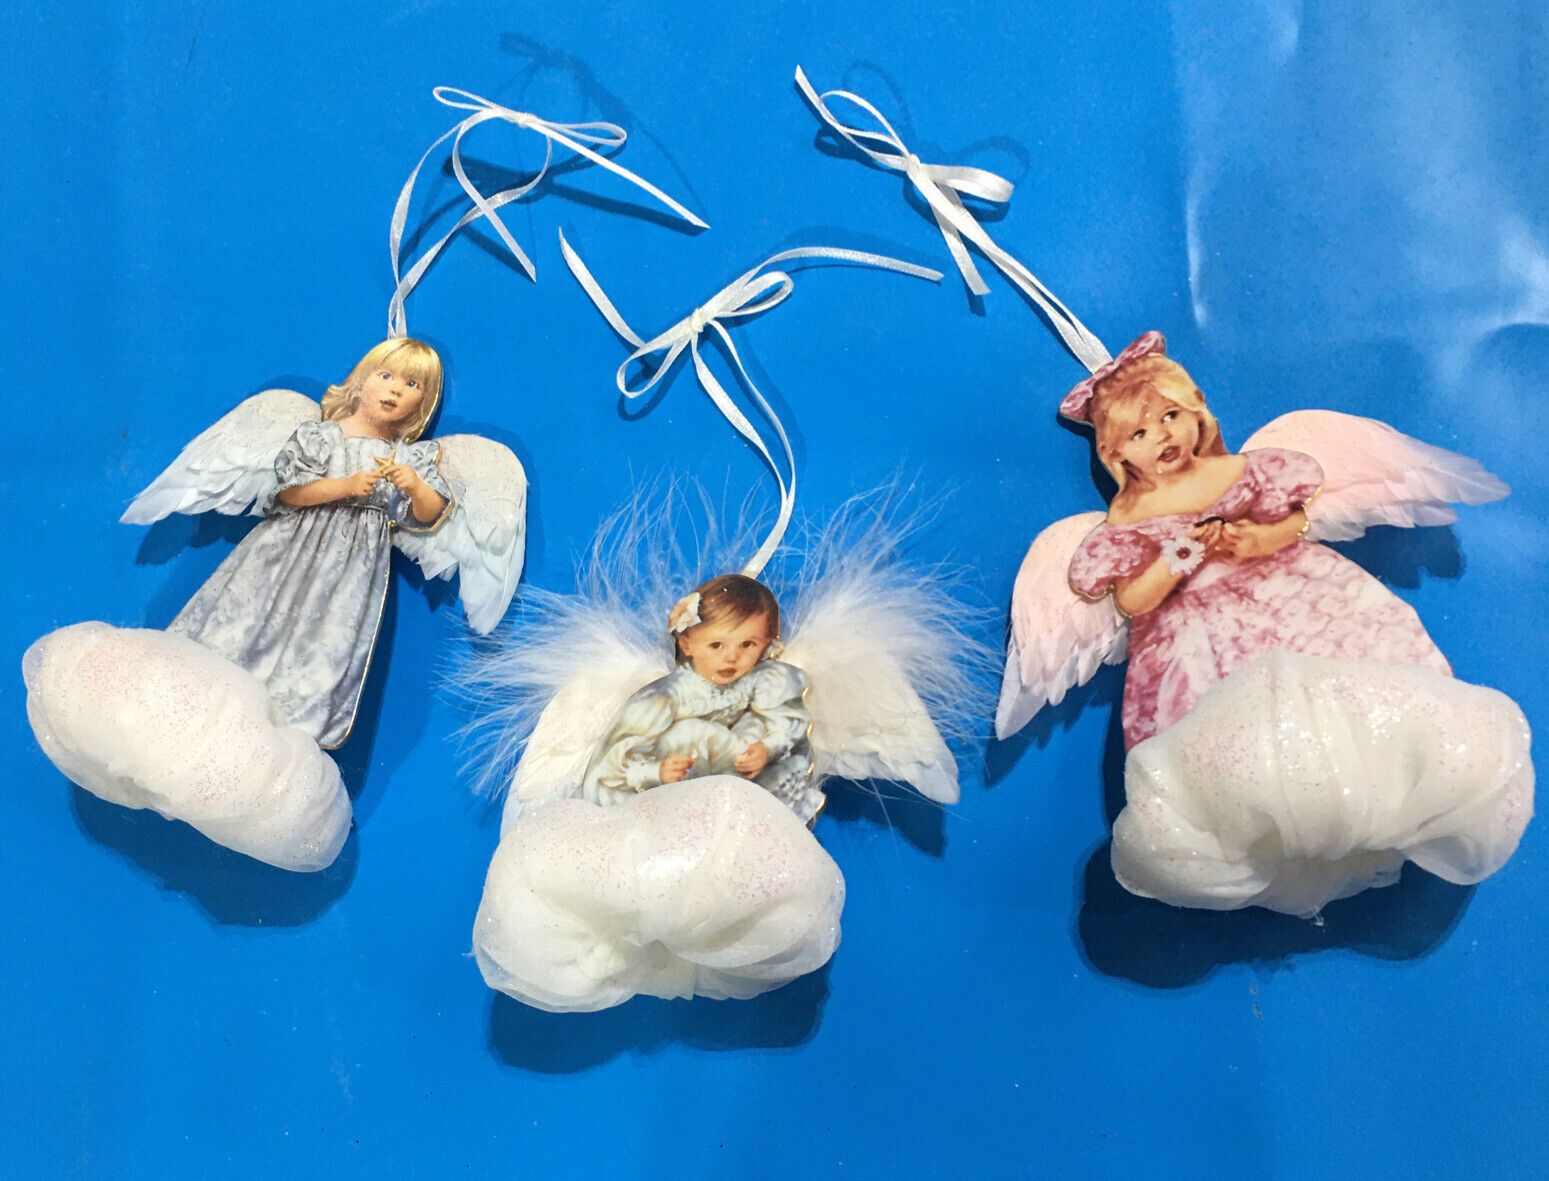 HEAVEN SENT ORNAMENTS 3 ANGELS IN CLOUDS BY Sandra Kuck. The Bradford Editions